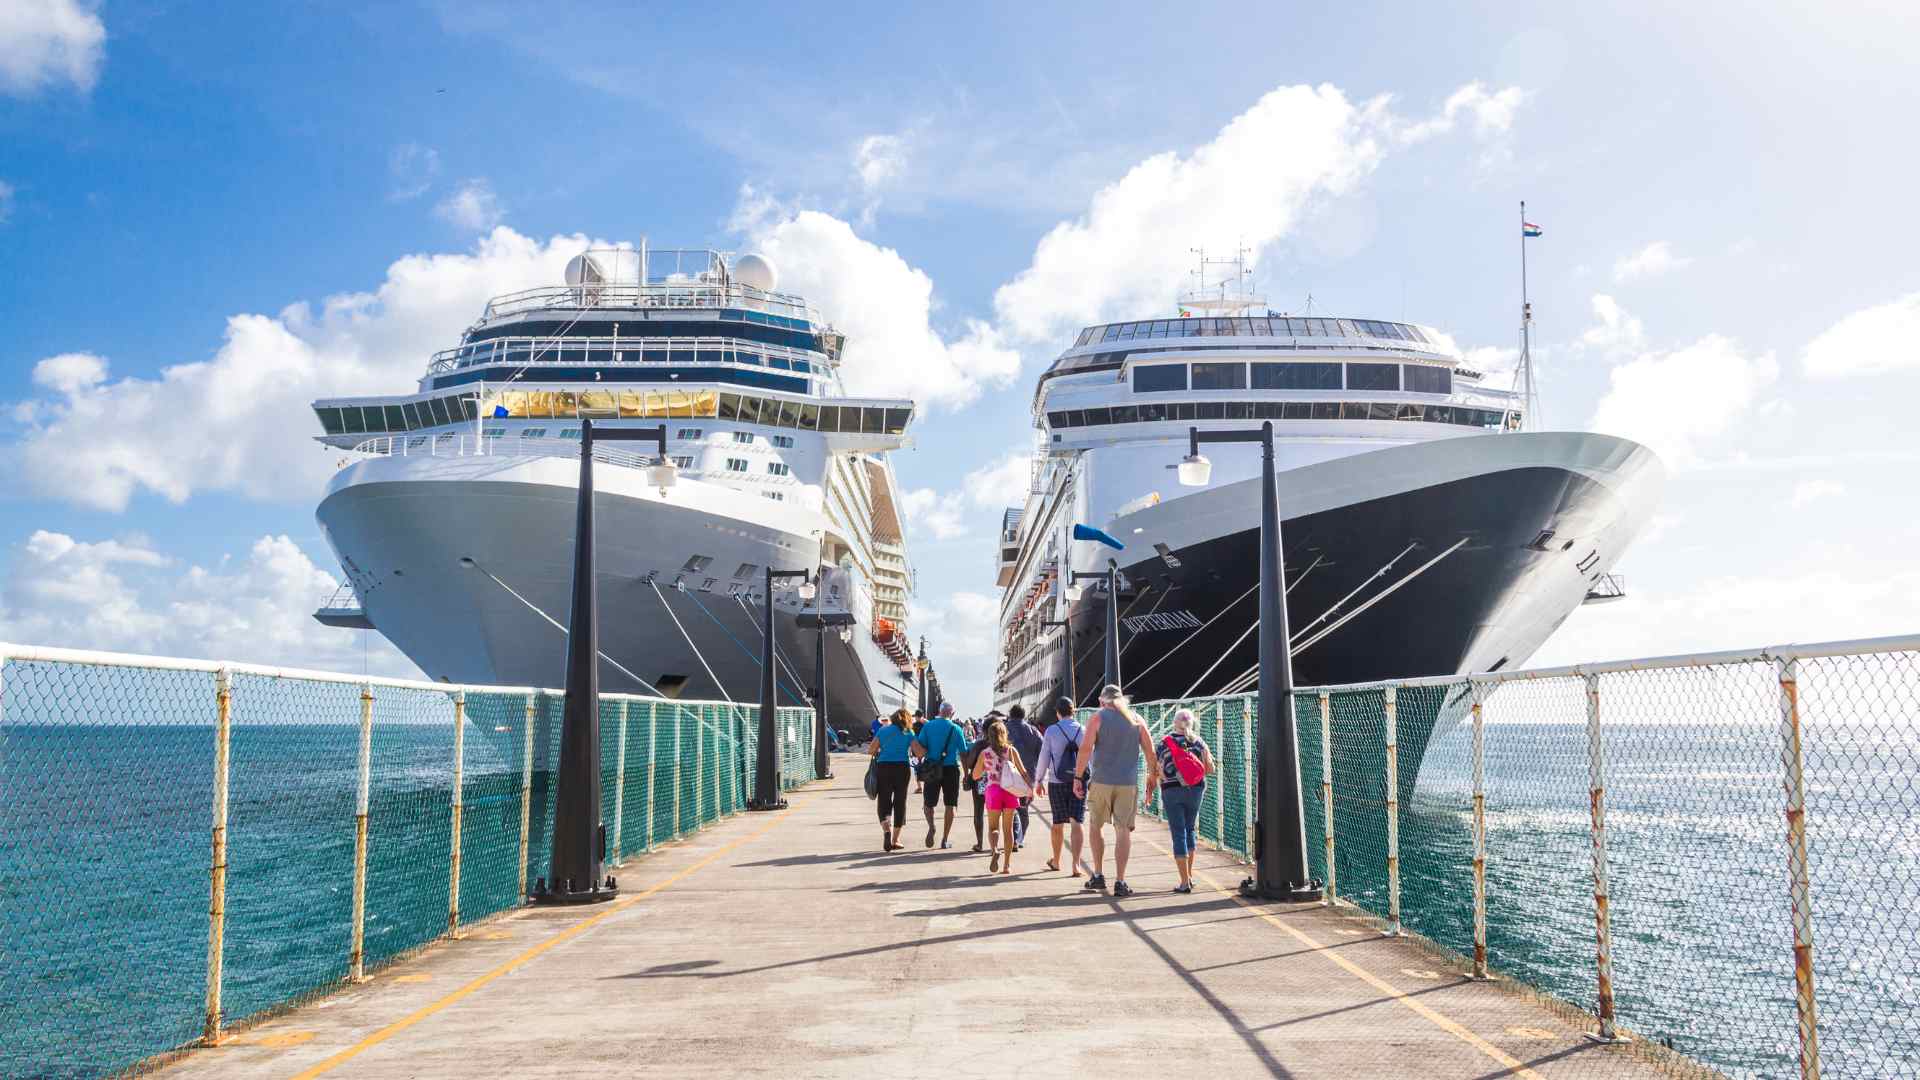 Special Events & Themed Cruises in July